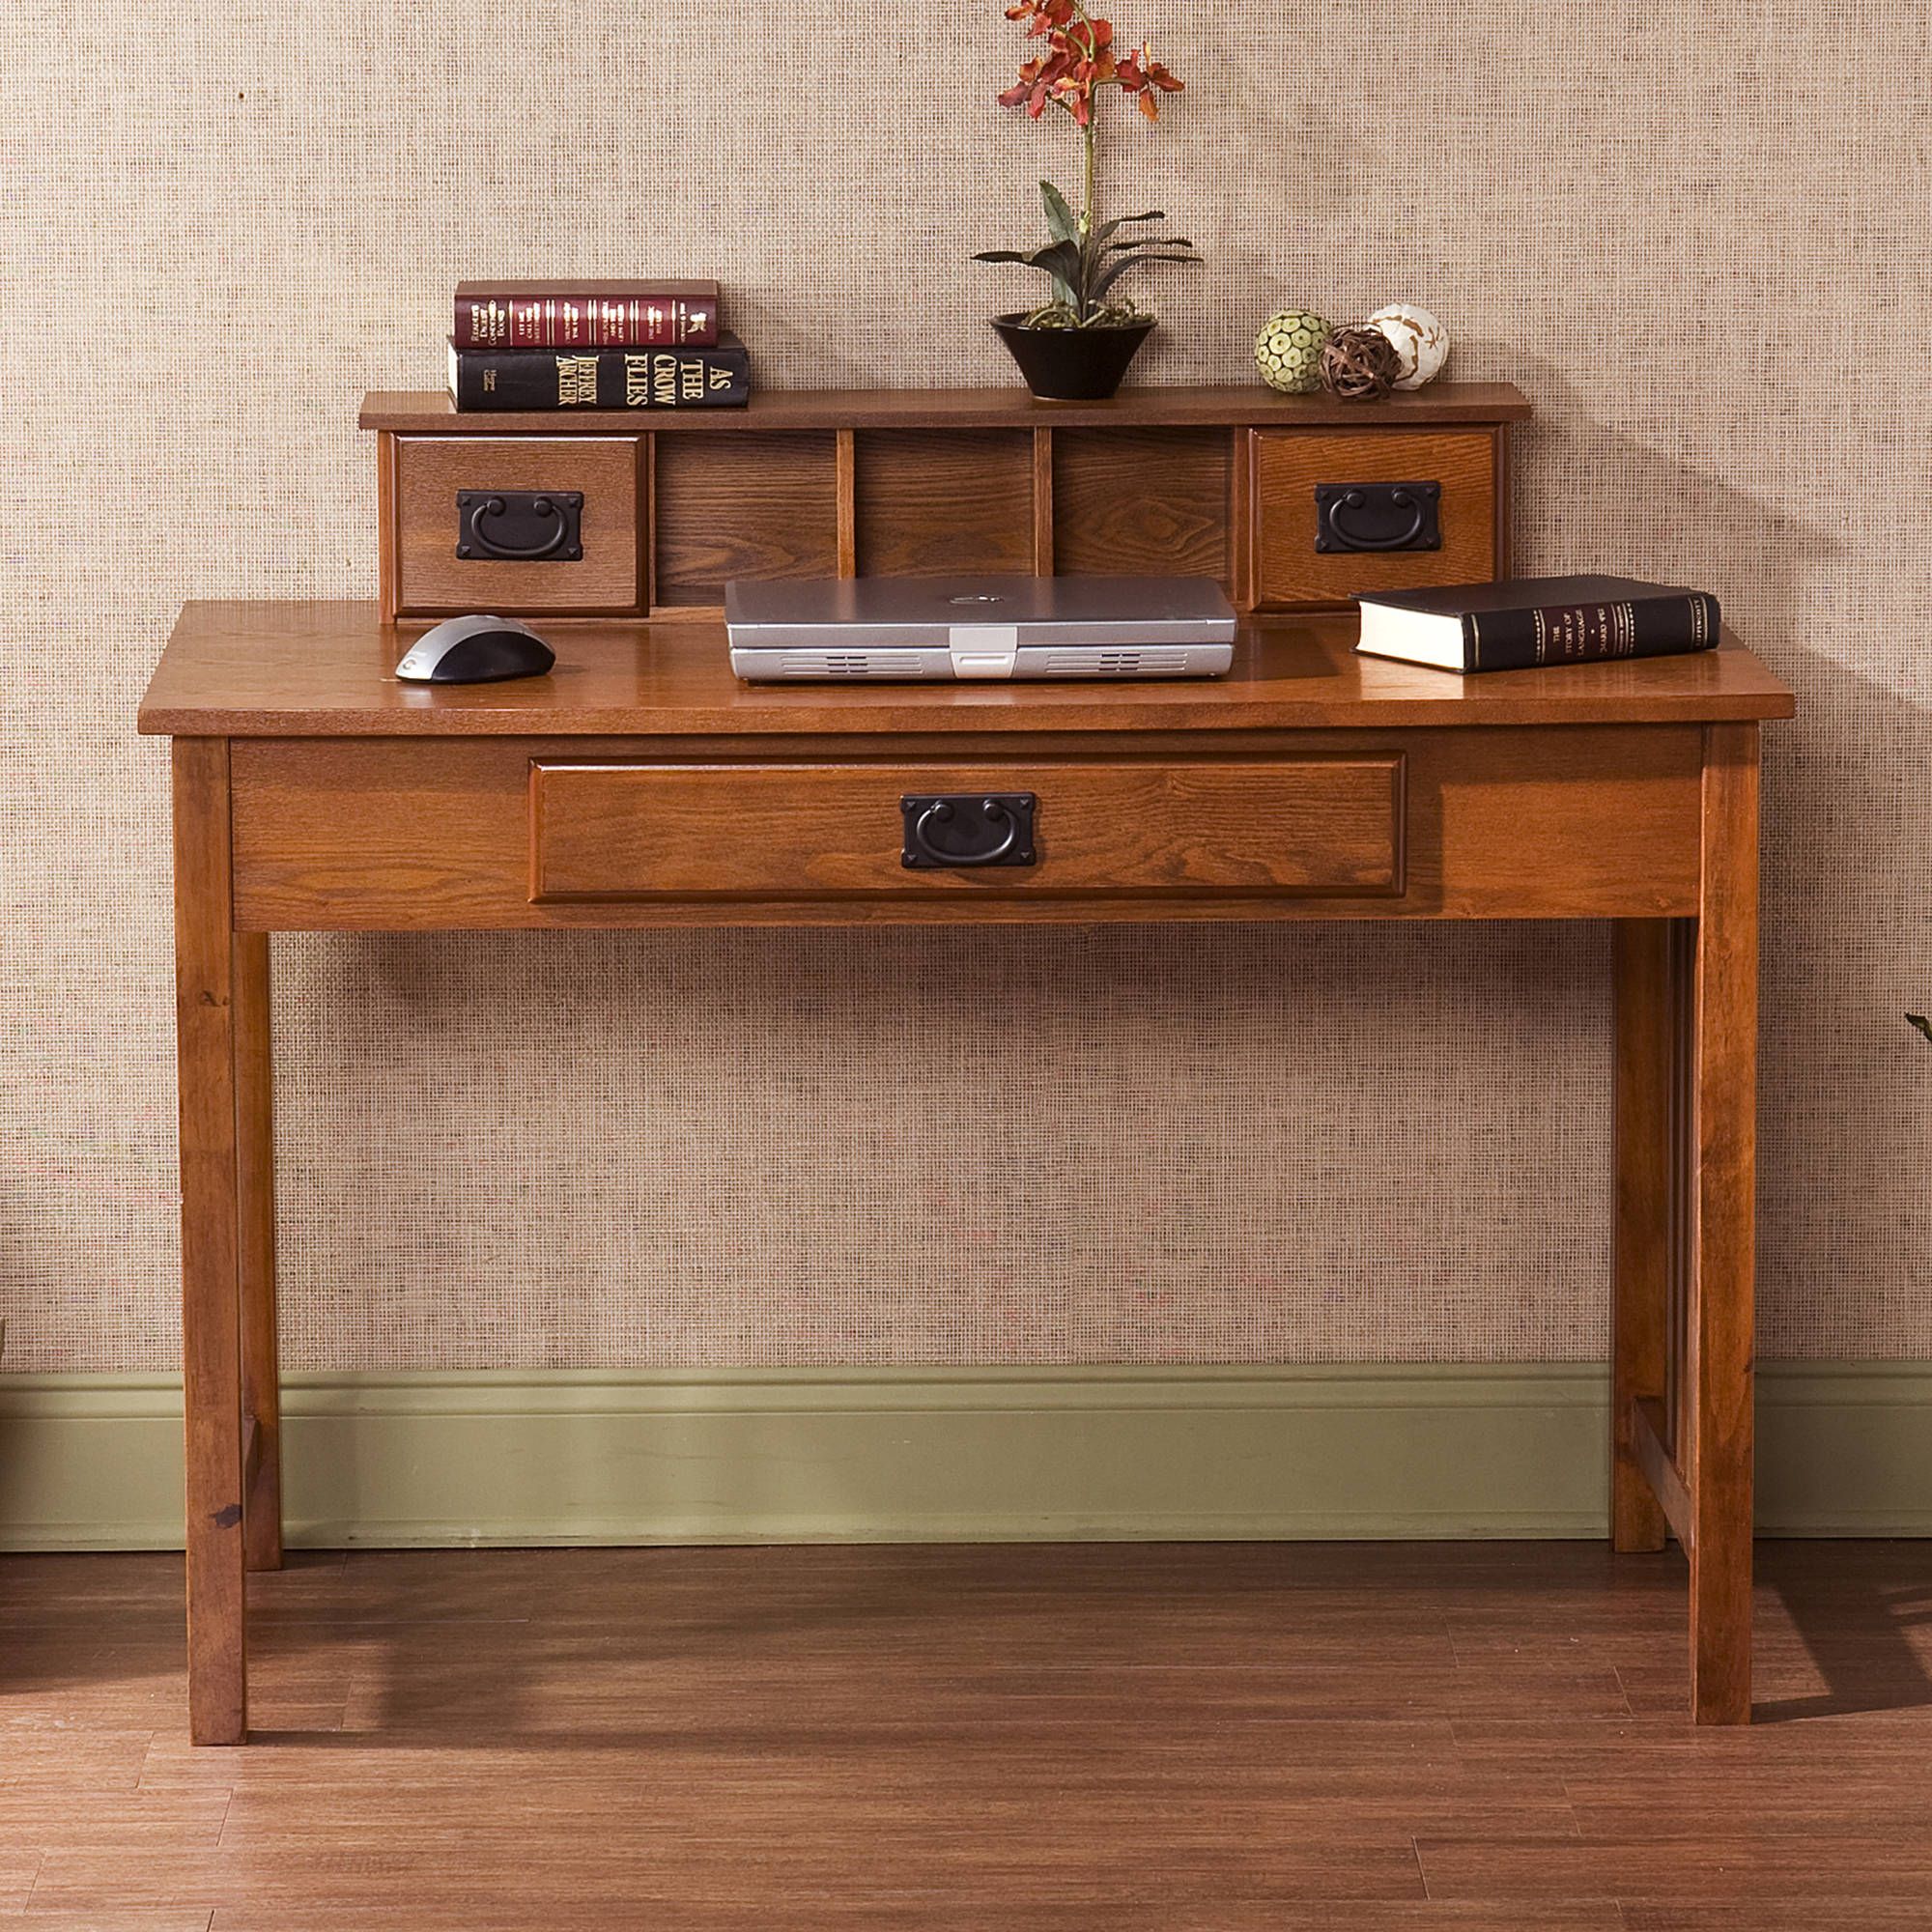 Amarillo Mission Style Writing Desk With Hutch, Oak – Walmart Intended For Sonoma Oak Writing Desks (View 2 of 15)